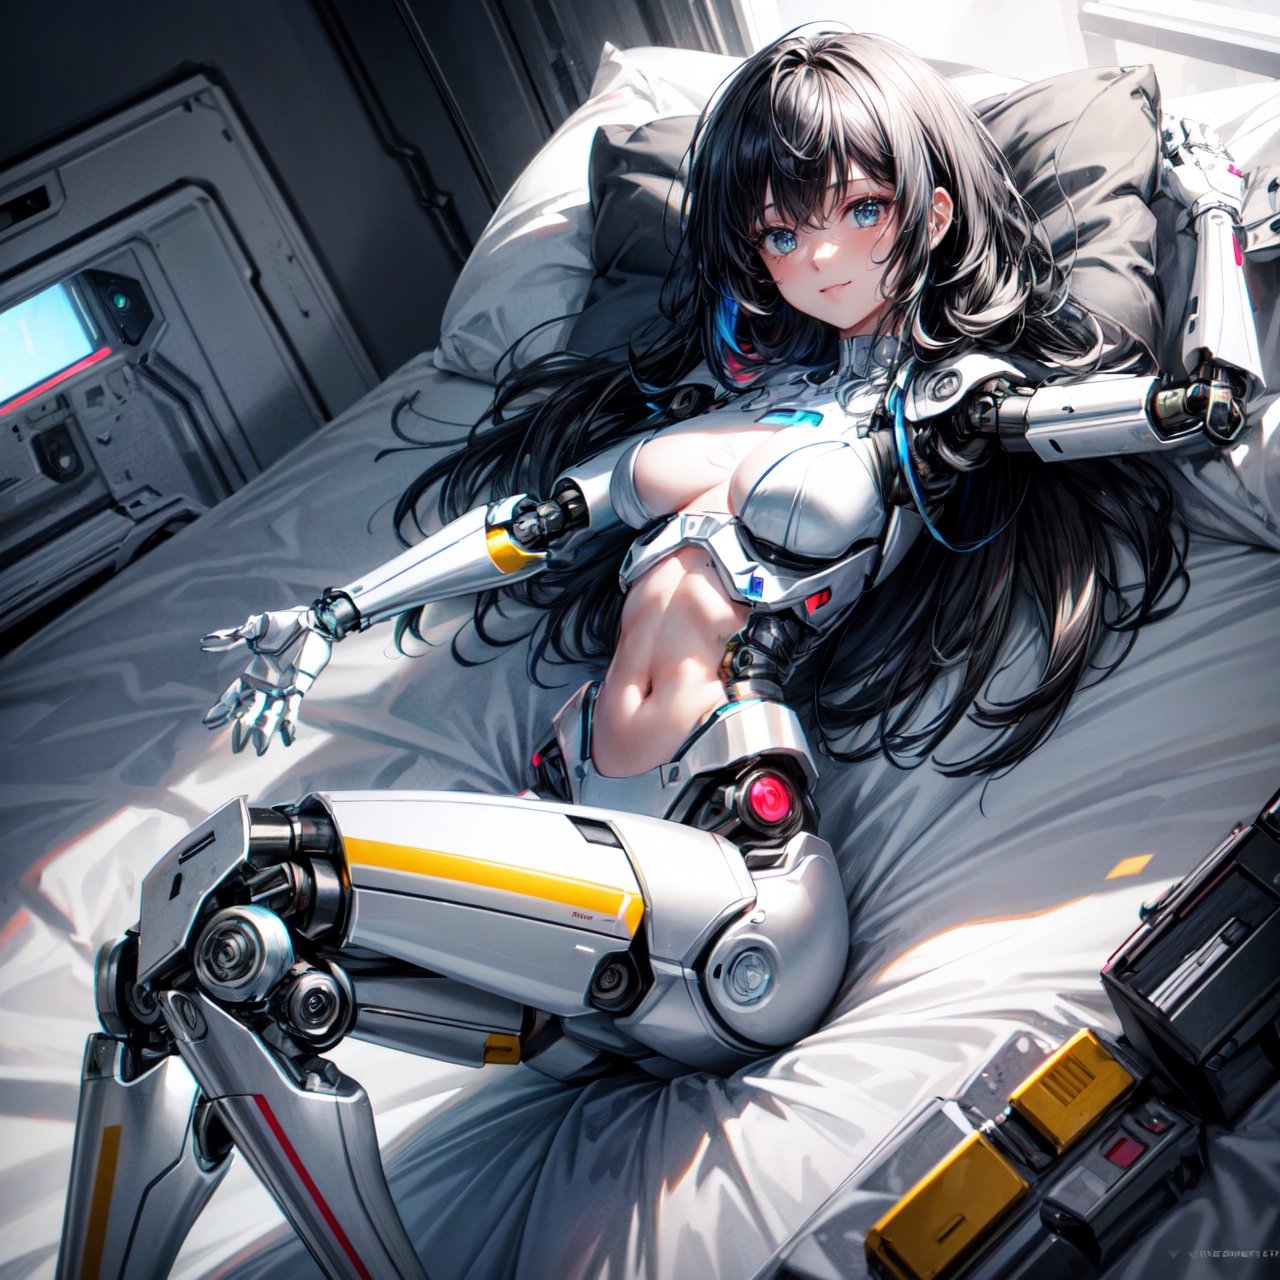 ((high resolution. 8K)), break. ((Illustraion and CG mixed style)), break. ((1 girl)), ((One android girl with archaic smile)), ((black hair:1.3)), break. ((relax in the bedroom fill of sunlight)), ((lying on back, on the double bed)), ((ready to hug)), (background: a modern bedroom with a double bed), break. ((slender mechanical boby)), ((intricate internal structure)), ((colorful brighten parts:1.2)), break. ((Her body is painted by chrome and light colors)), break. ((robotic arms, robotic legs, robotic hands)), ((robotic joint:1.2)), break. Cinematic angle, panorama, ultra fine quality, masterpiece, best quality, incredibly absurdres, fhighly detailed, sharp focus, (photon mapping, radiosity, physically-based rendering, automatic white balance), masterpiece, best quality